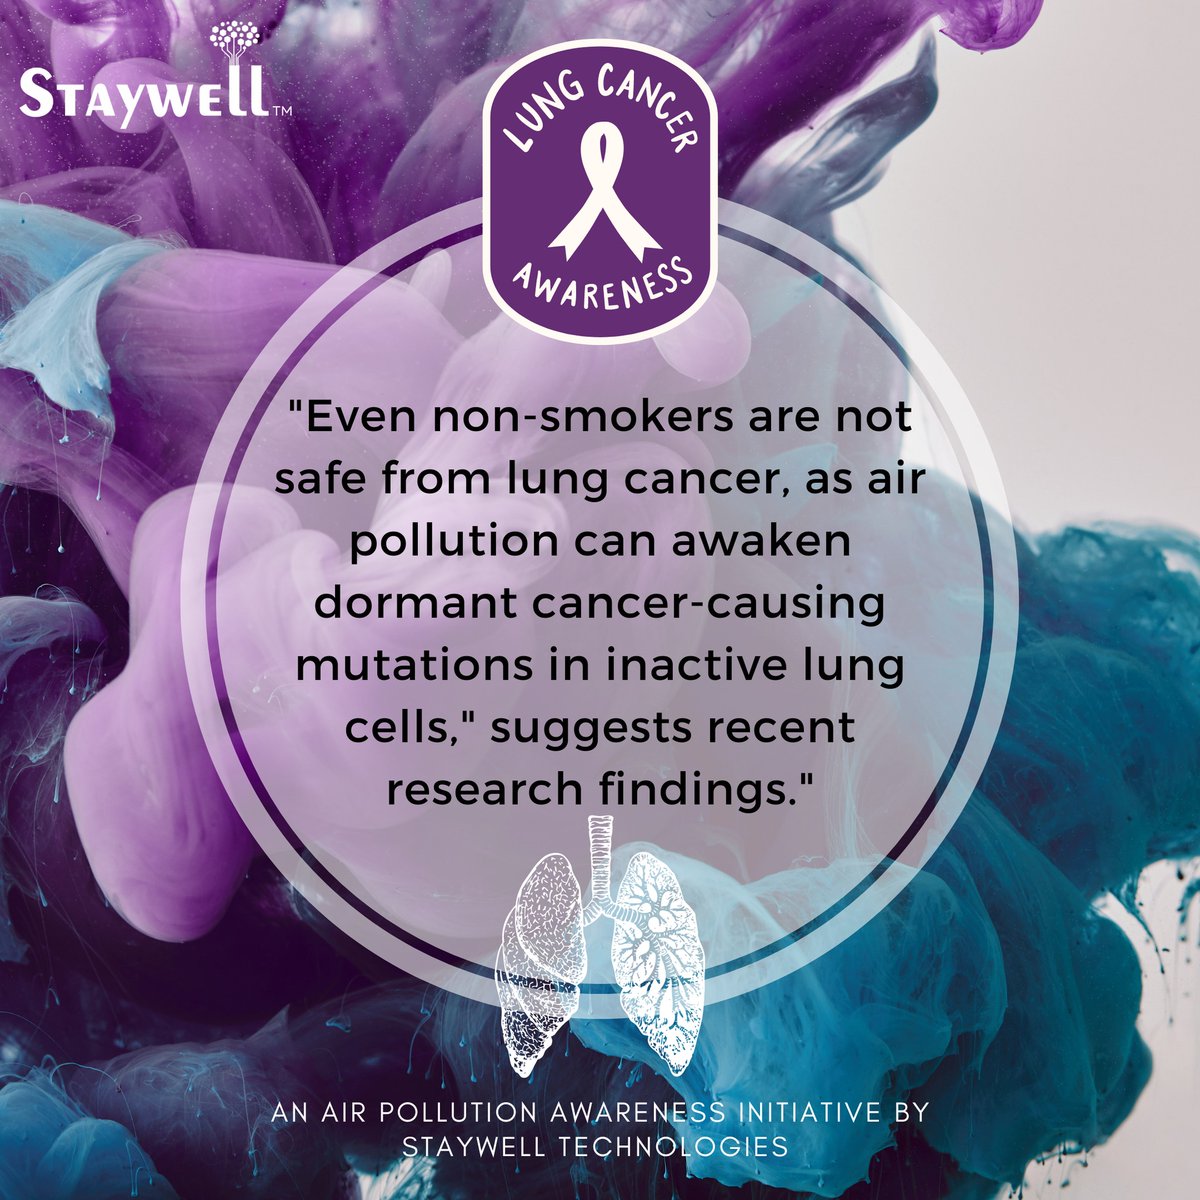 #LungCancer #Lung #Cancer #AirPollution #CleanAirMatters #VibhorAgarwal #Staywell #StaywellTechnologies #AirYouCanWear